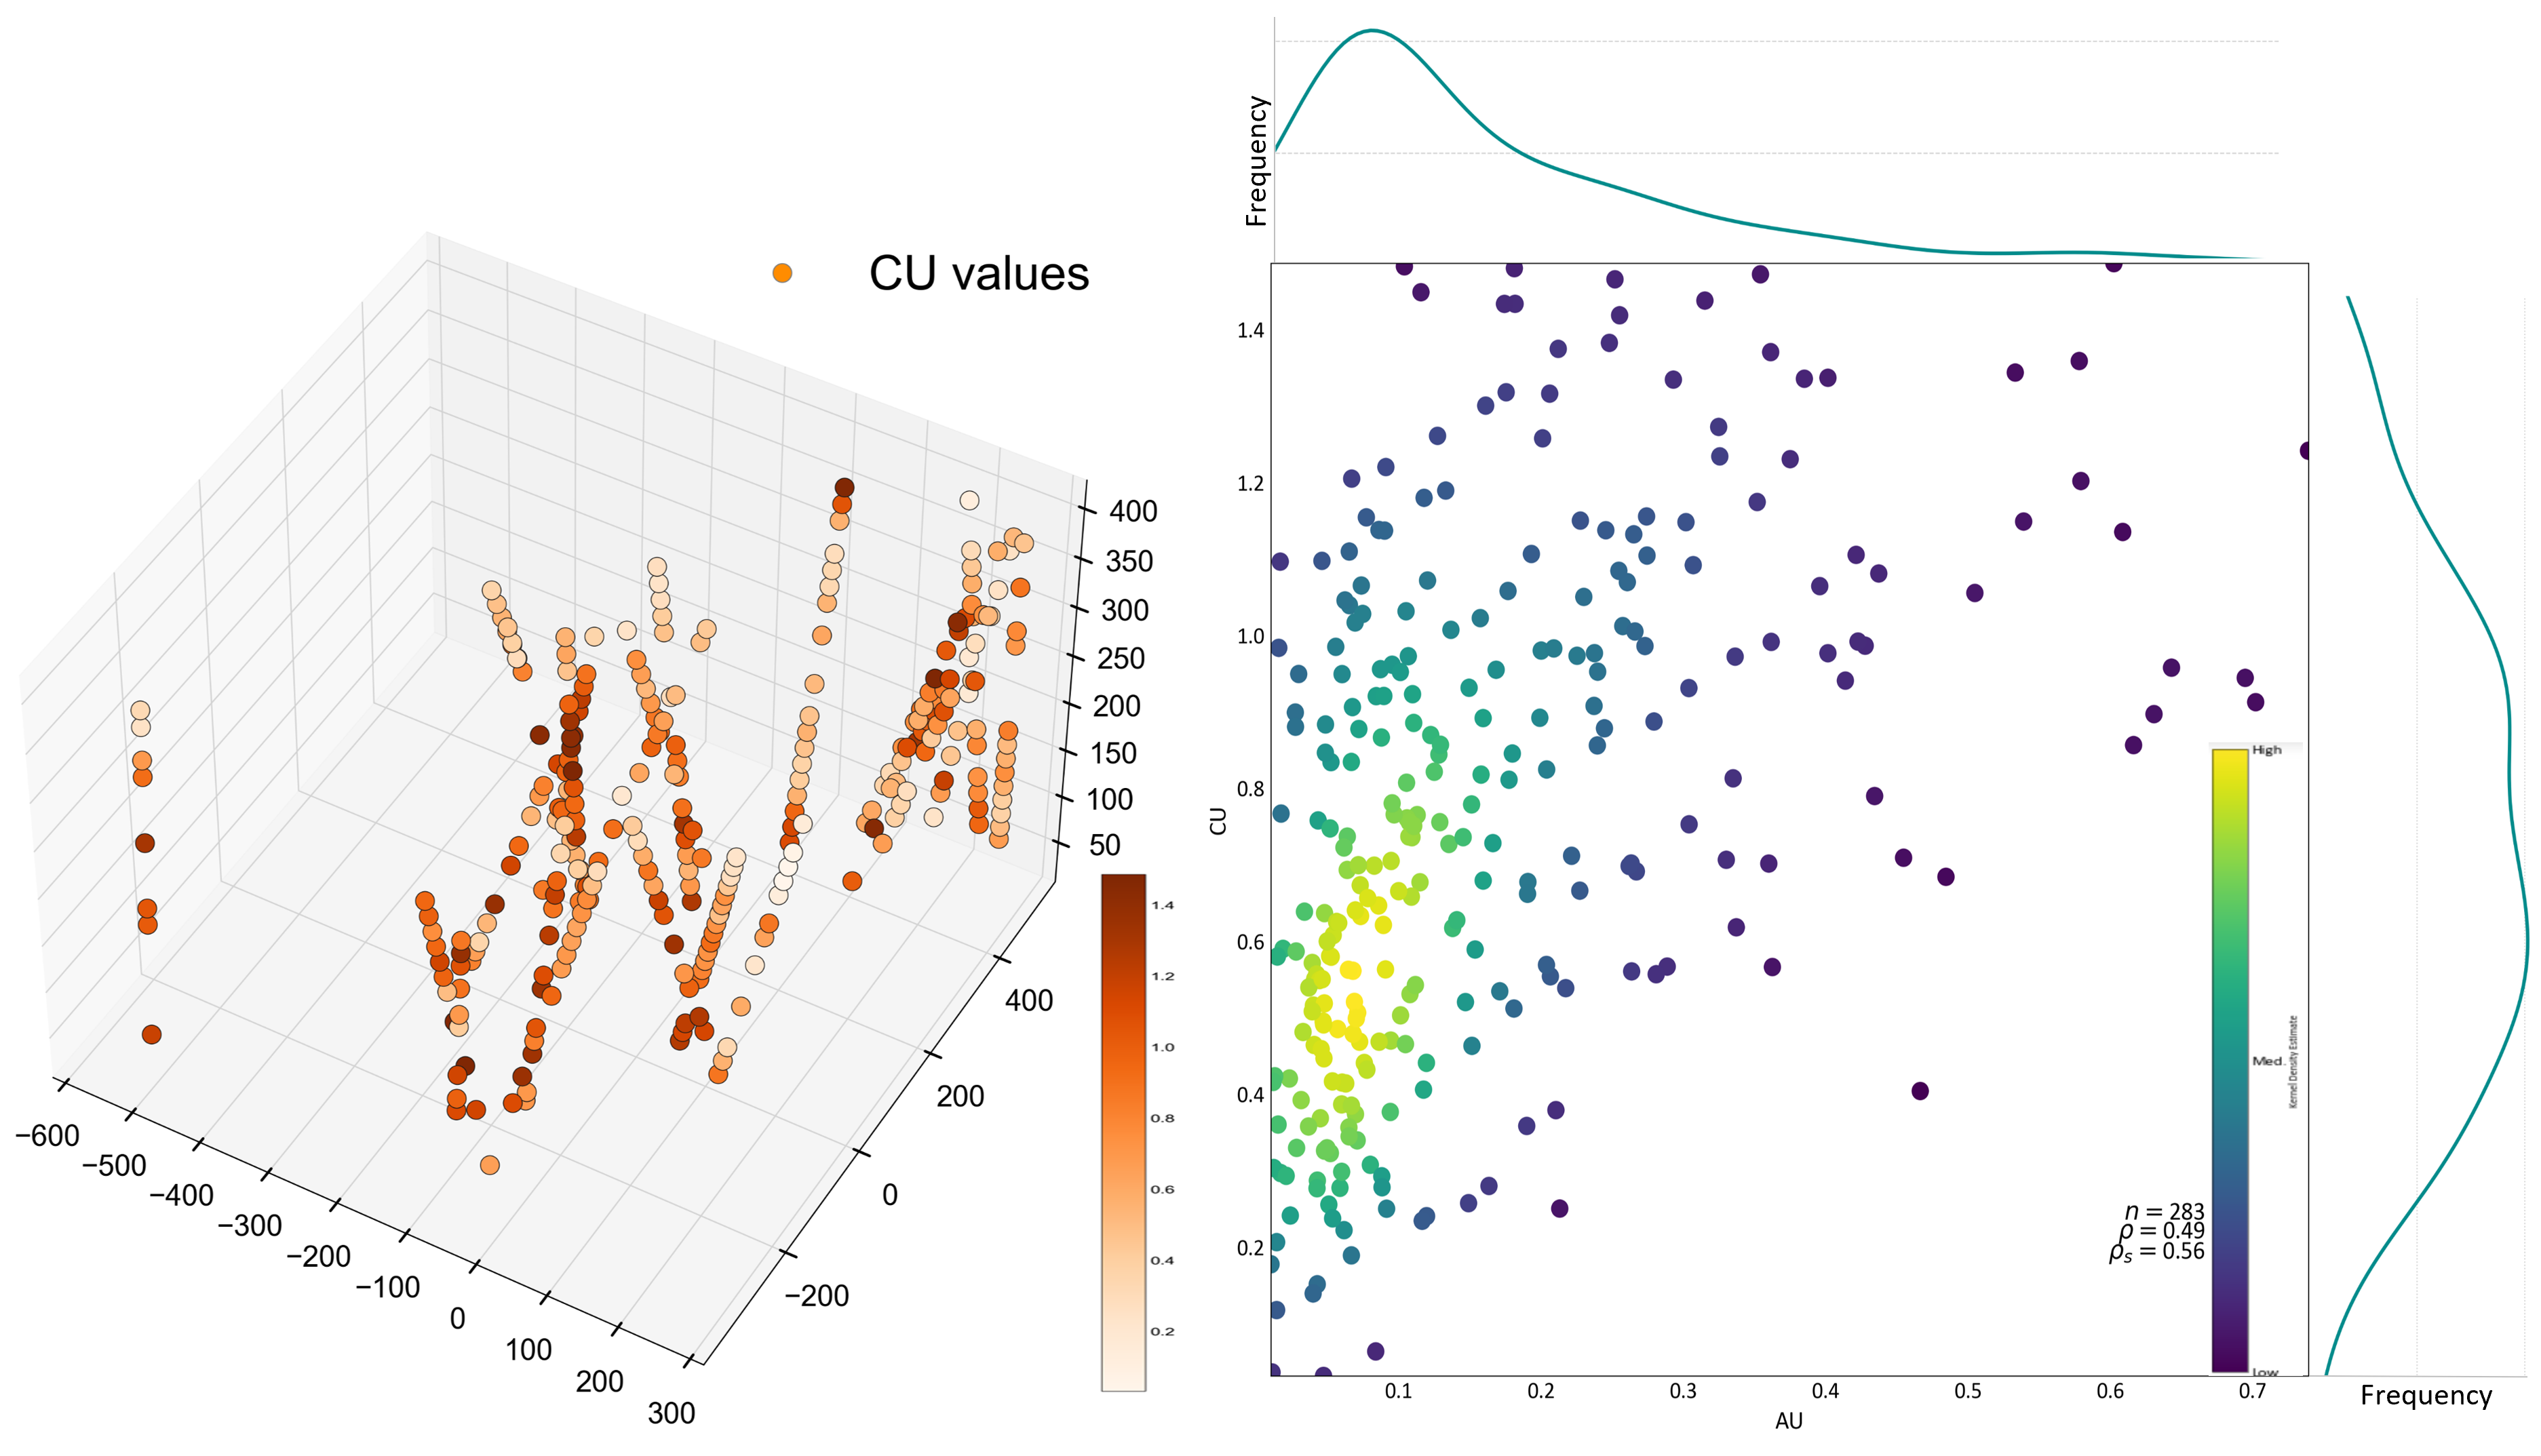 Porphyry data 3-D Location map at the left and joint-plot of Gold and Copper variables (scatter-plot and marginal histograms) on the right side.